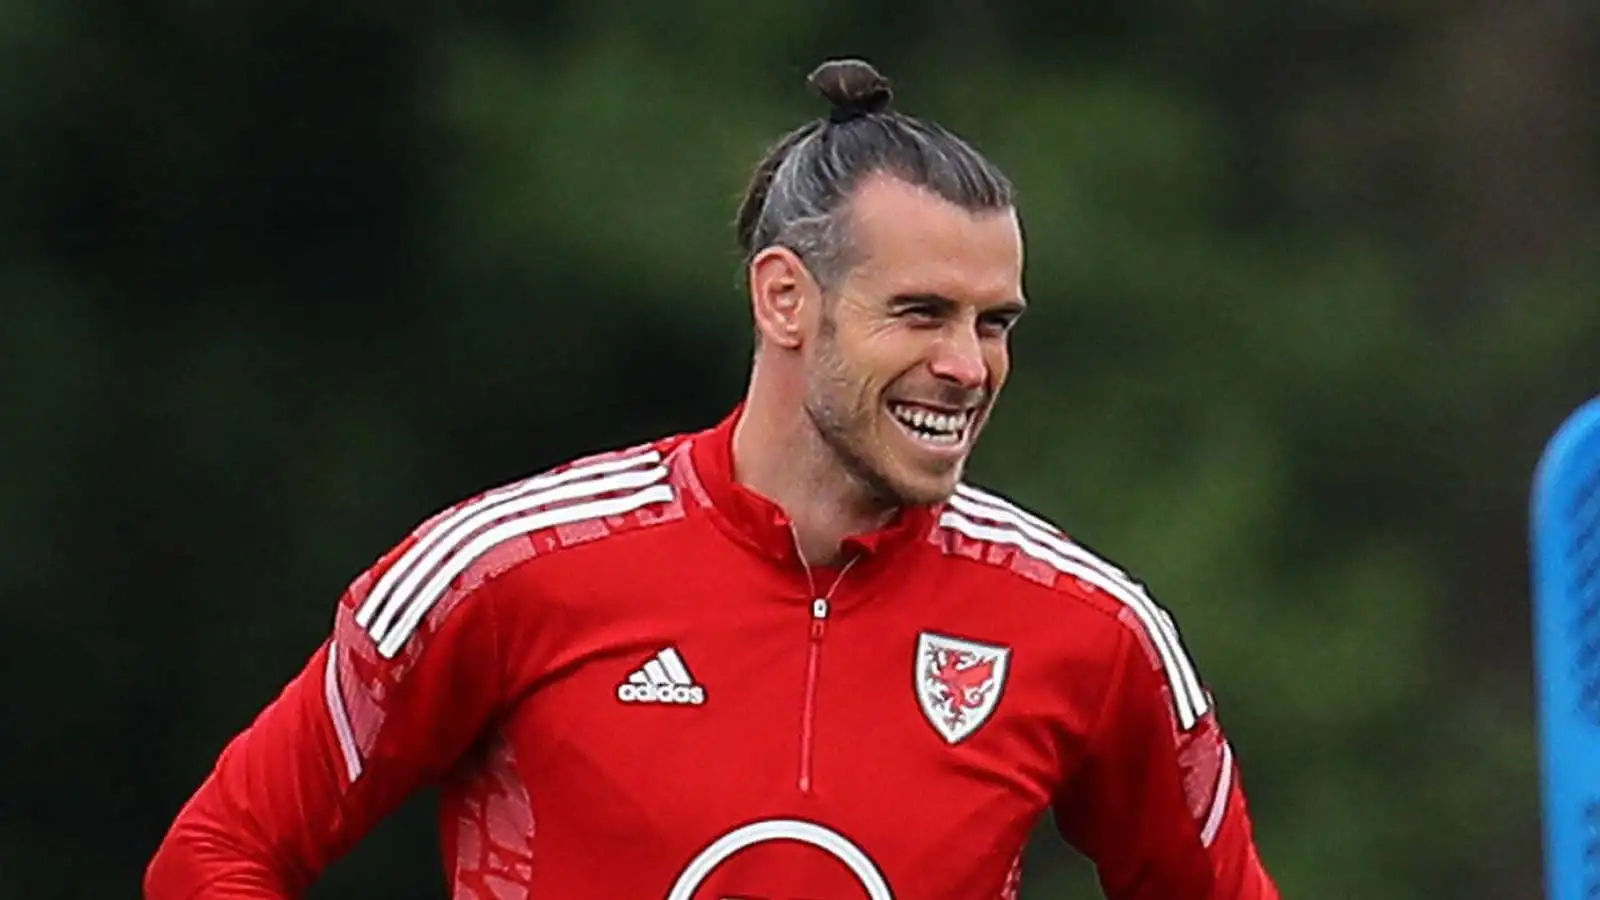 Gareth Bale 'has a break in his contract that could see him leave LAFC